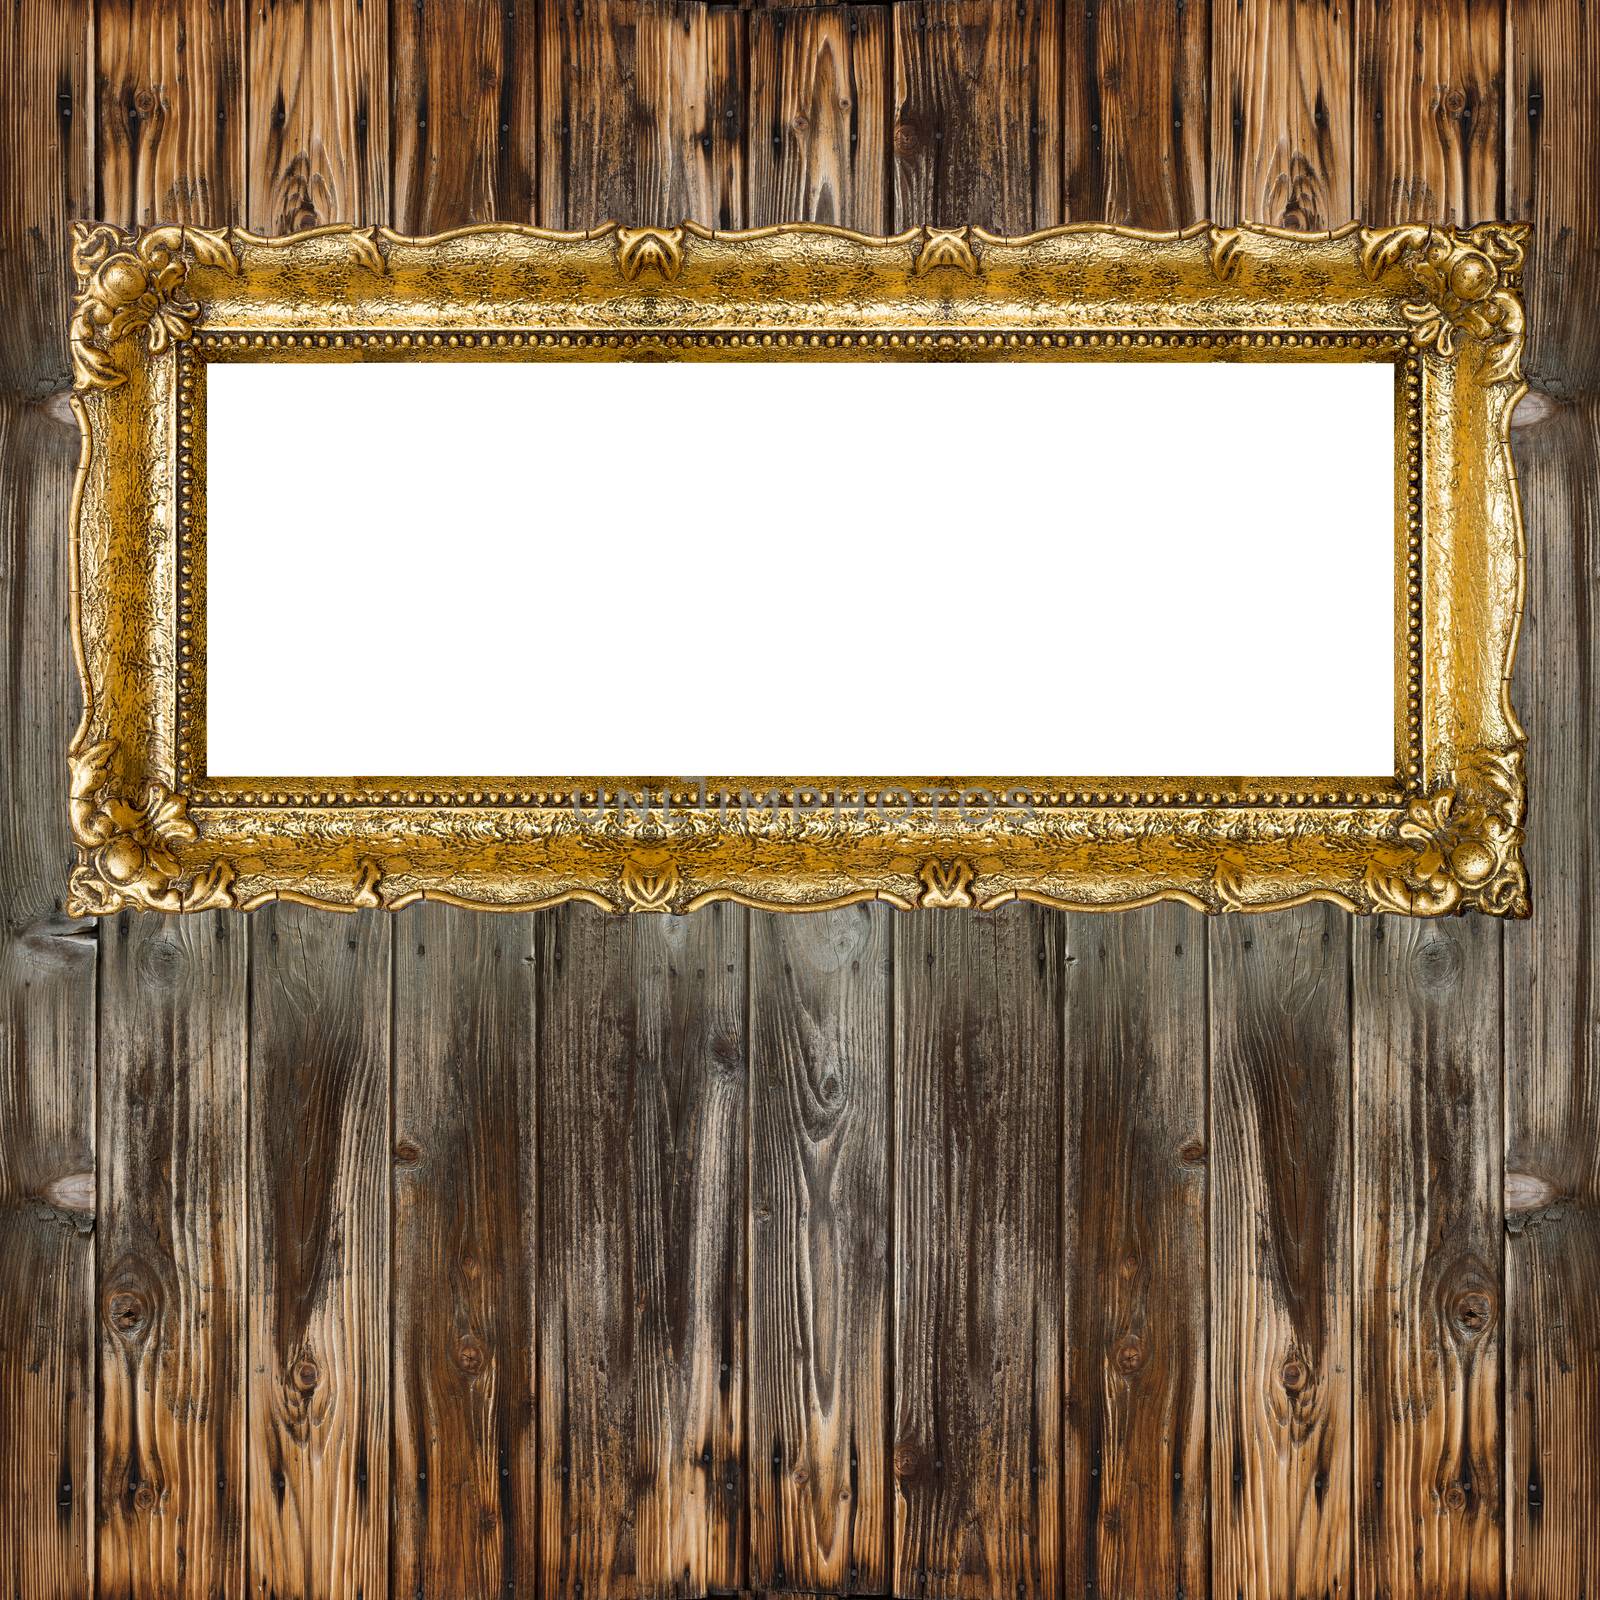 Big Old Picture Frame on wooden baclground, graphic design mockup element